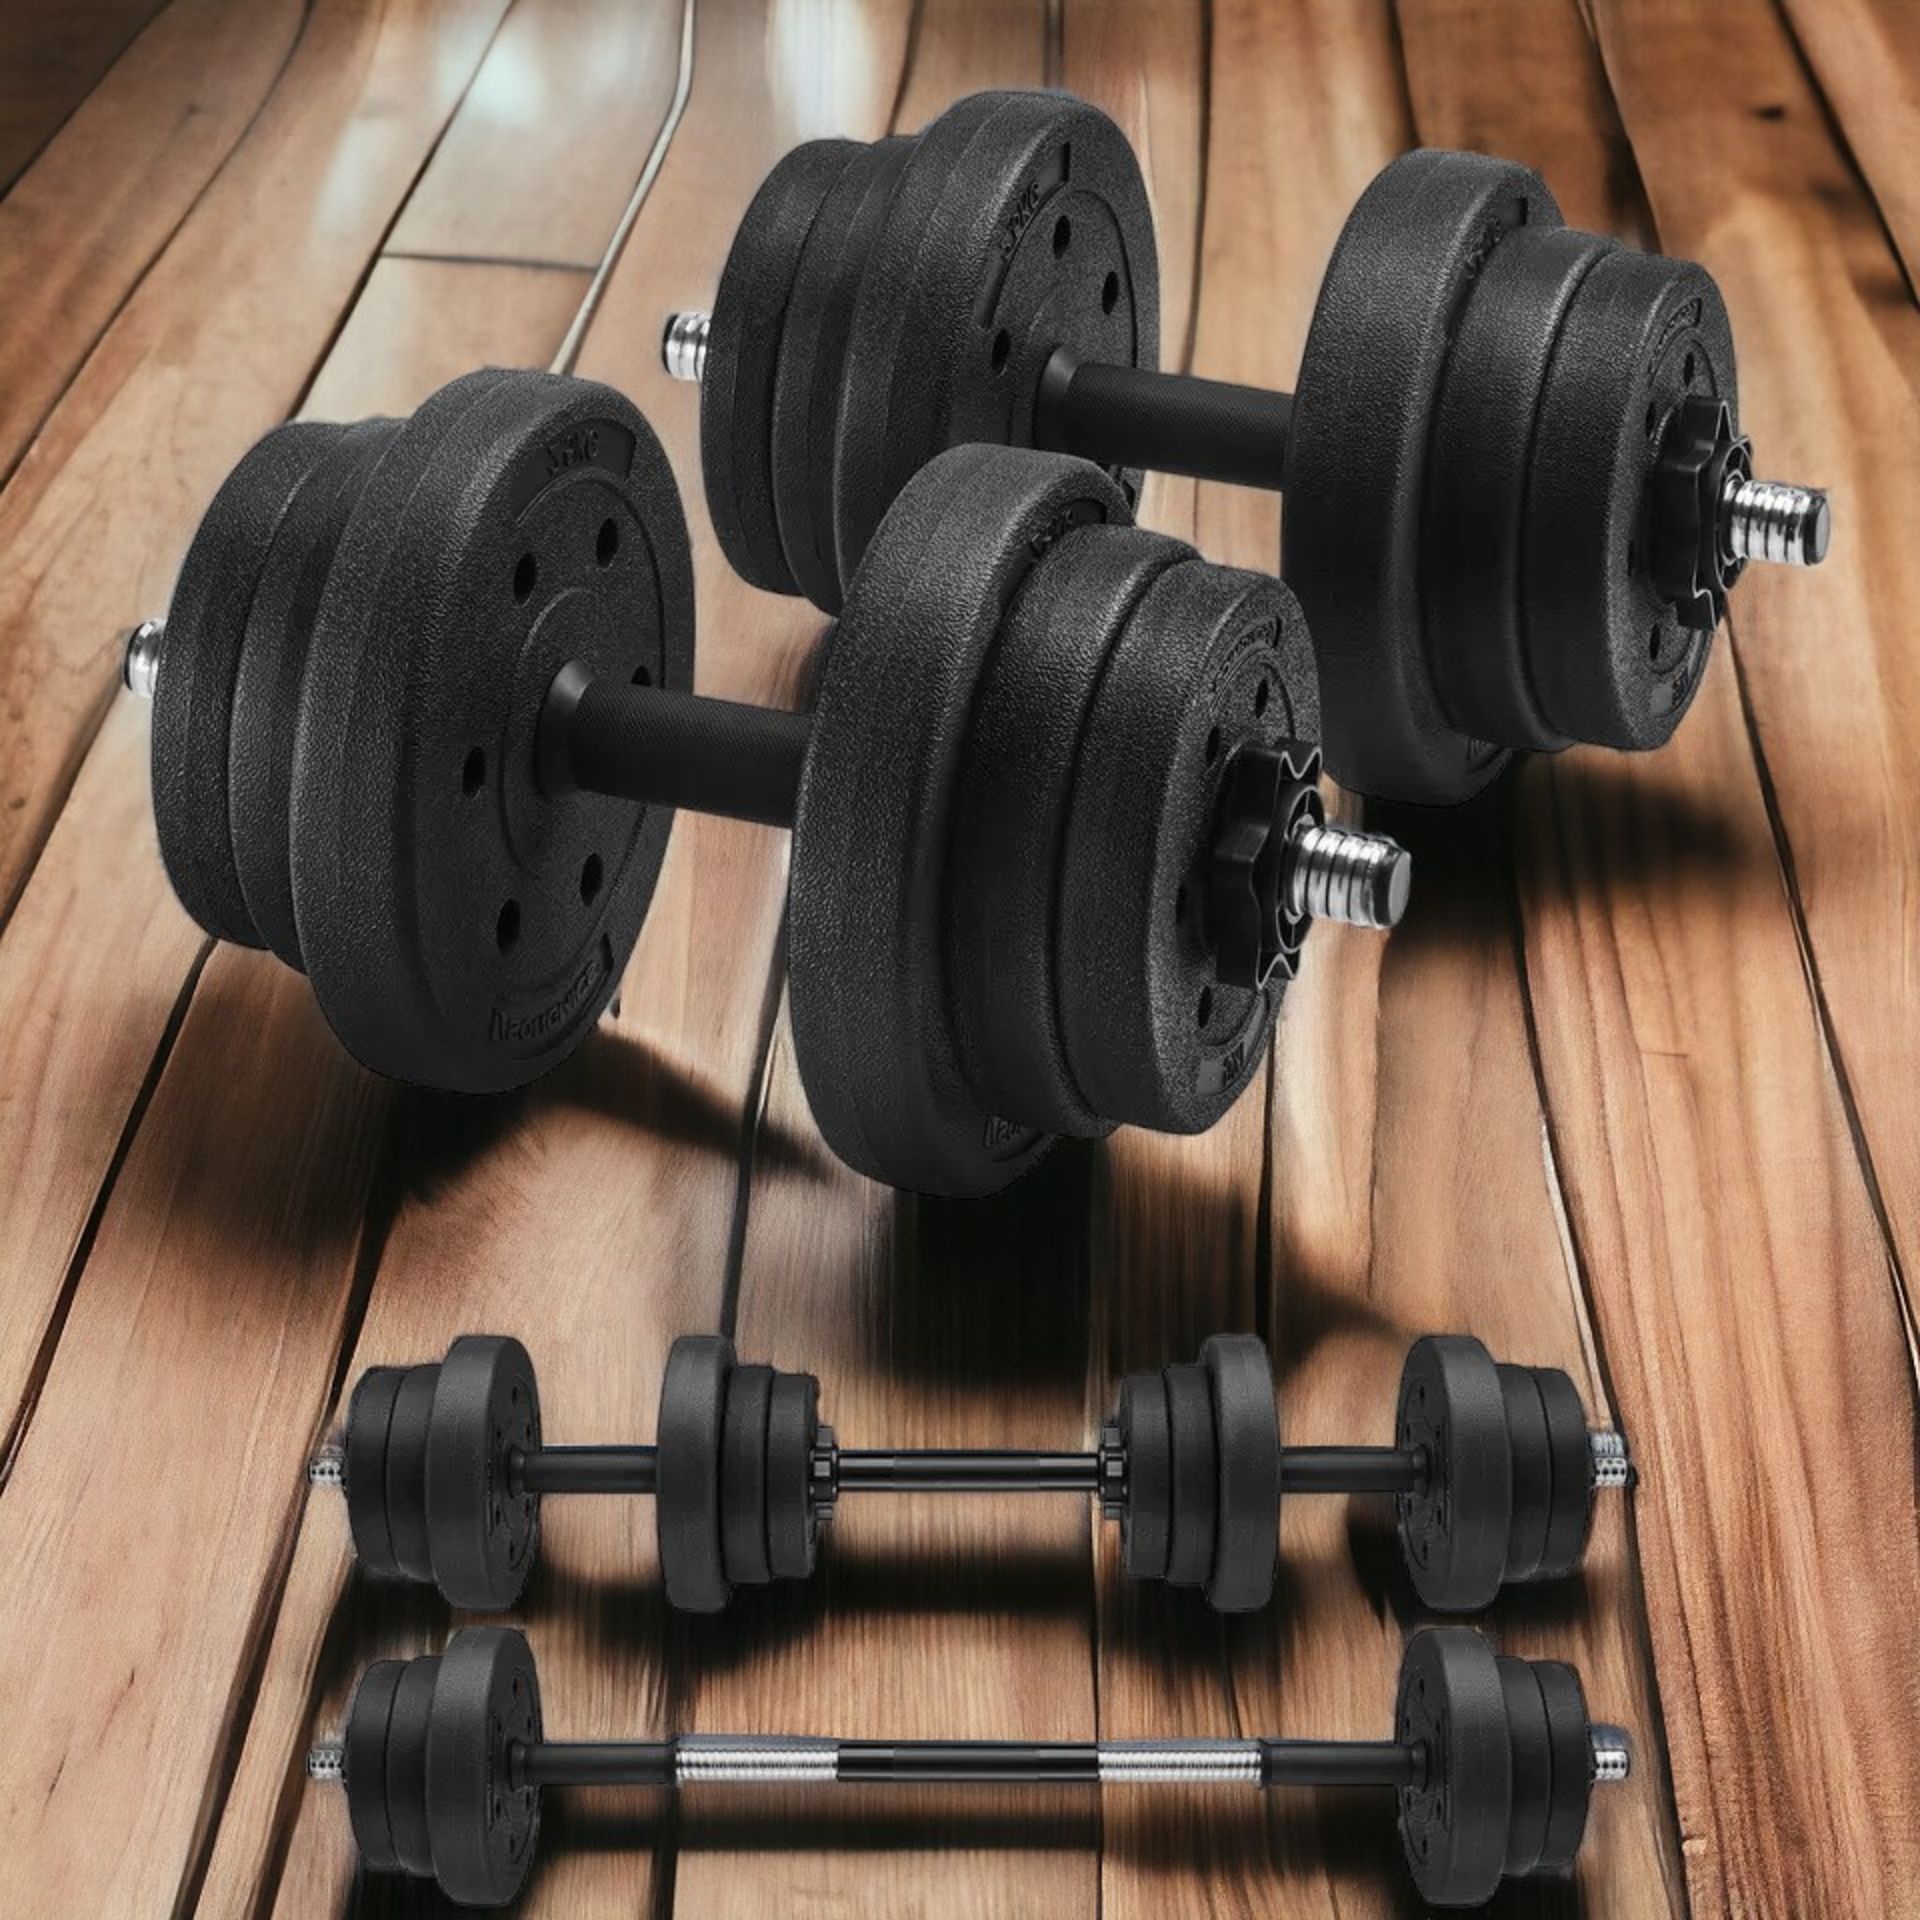 FREE DELIVERY - BRAND NEW ADJUSTABLE DUMBBELLS SET,WORKOUT FITNESS TRAINING WEIGHTS LIFTING